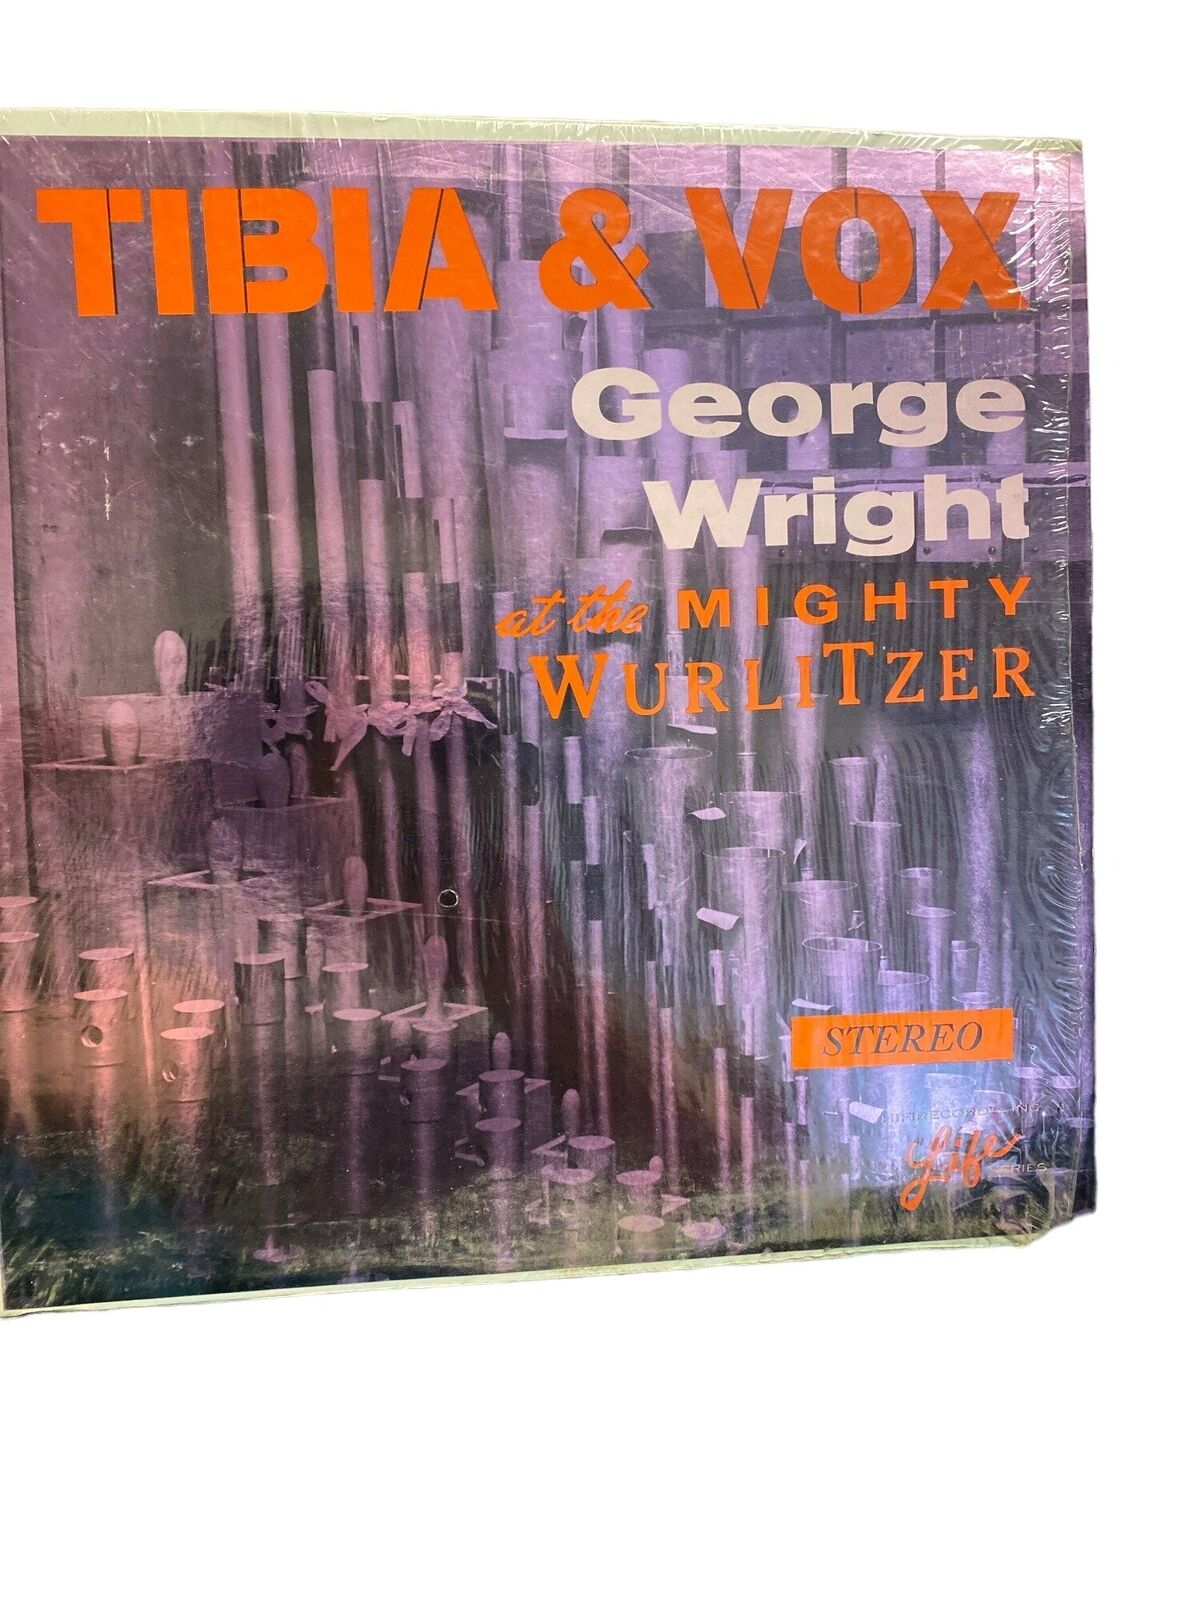 Vintage vinyl record Tibia and Vox George Wright and the mightly wurlitzer